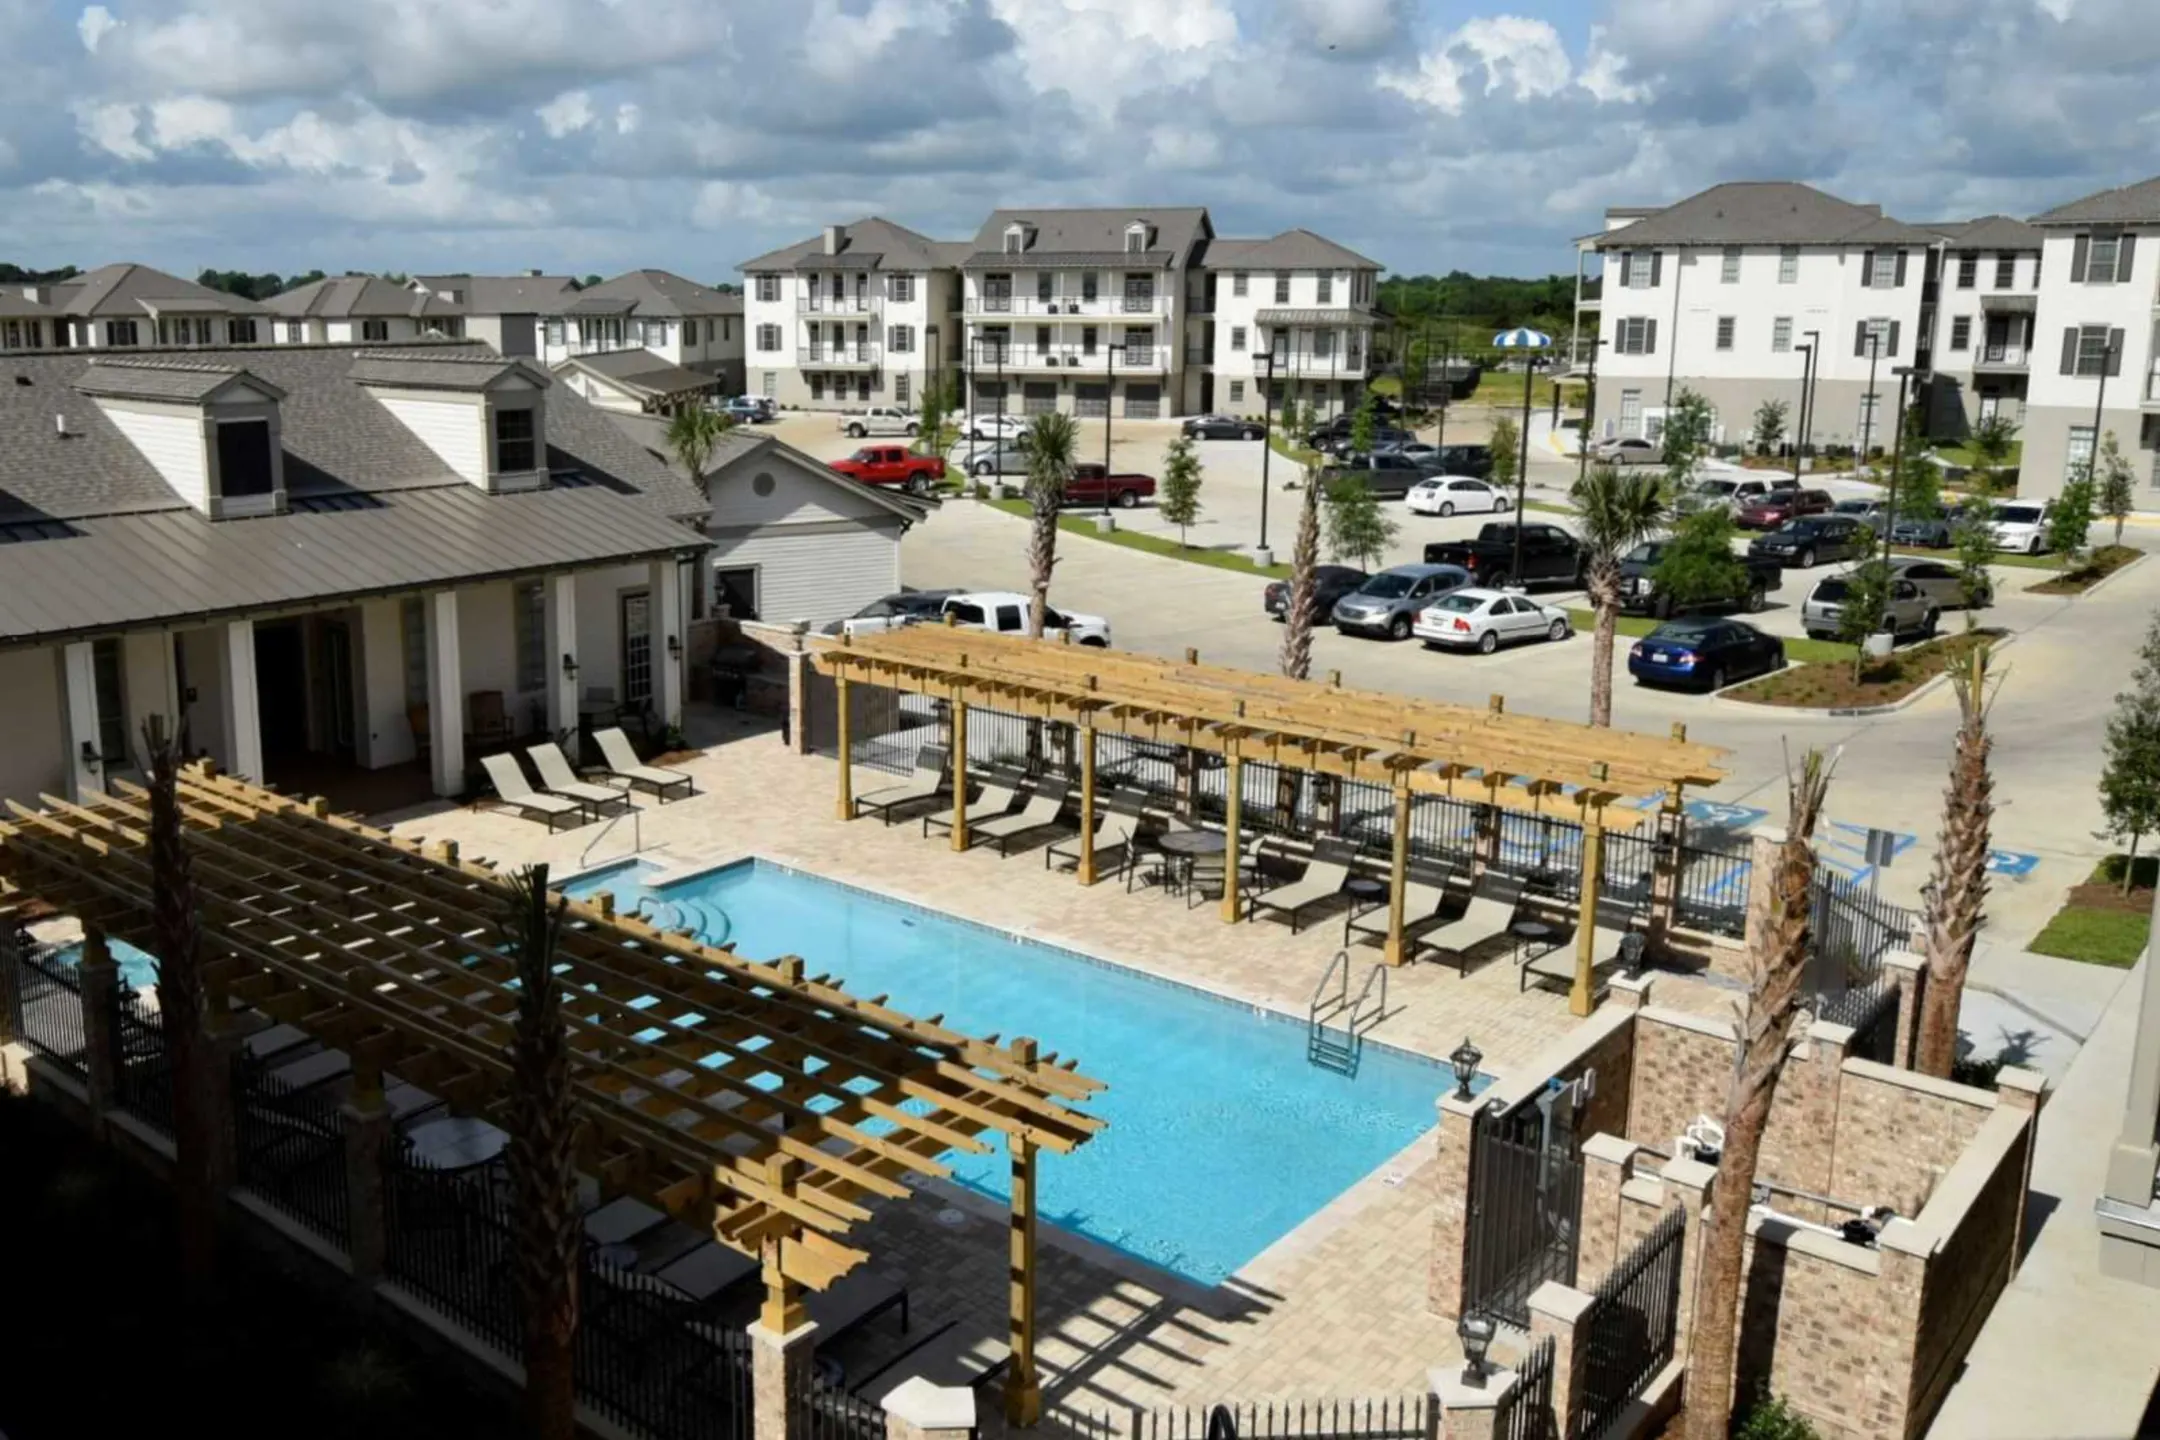 Pool - Waterview Luxury Apartments - Youngsville, LA